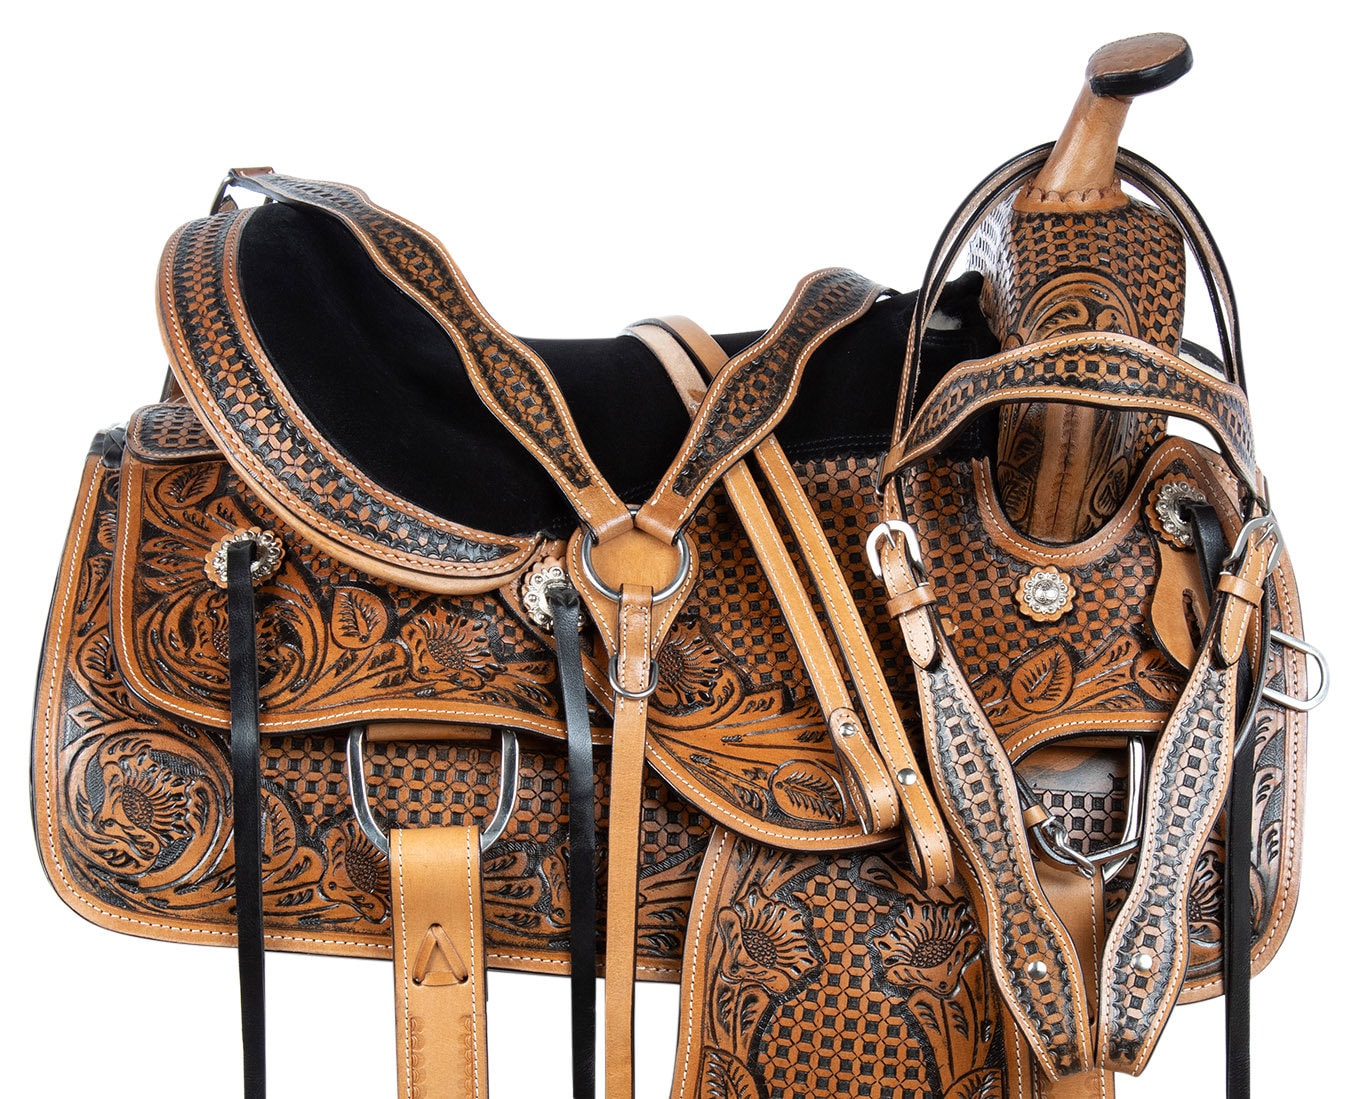 Antique leather tooled Western pleasure trail ranch classic horse saddle tack set 15 16 17 18